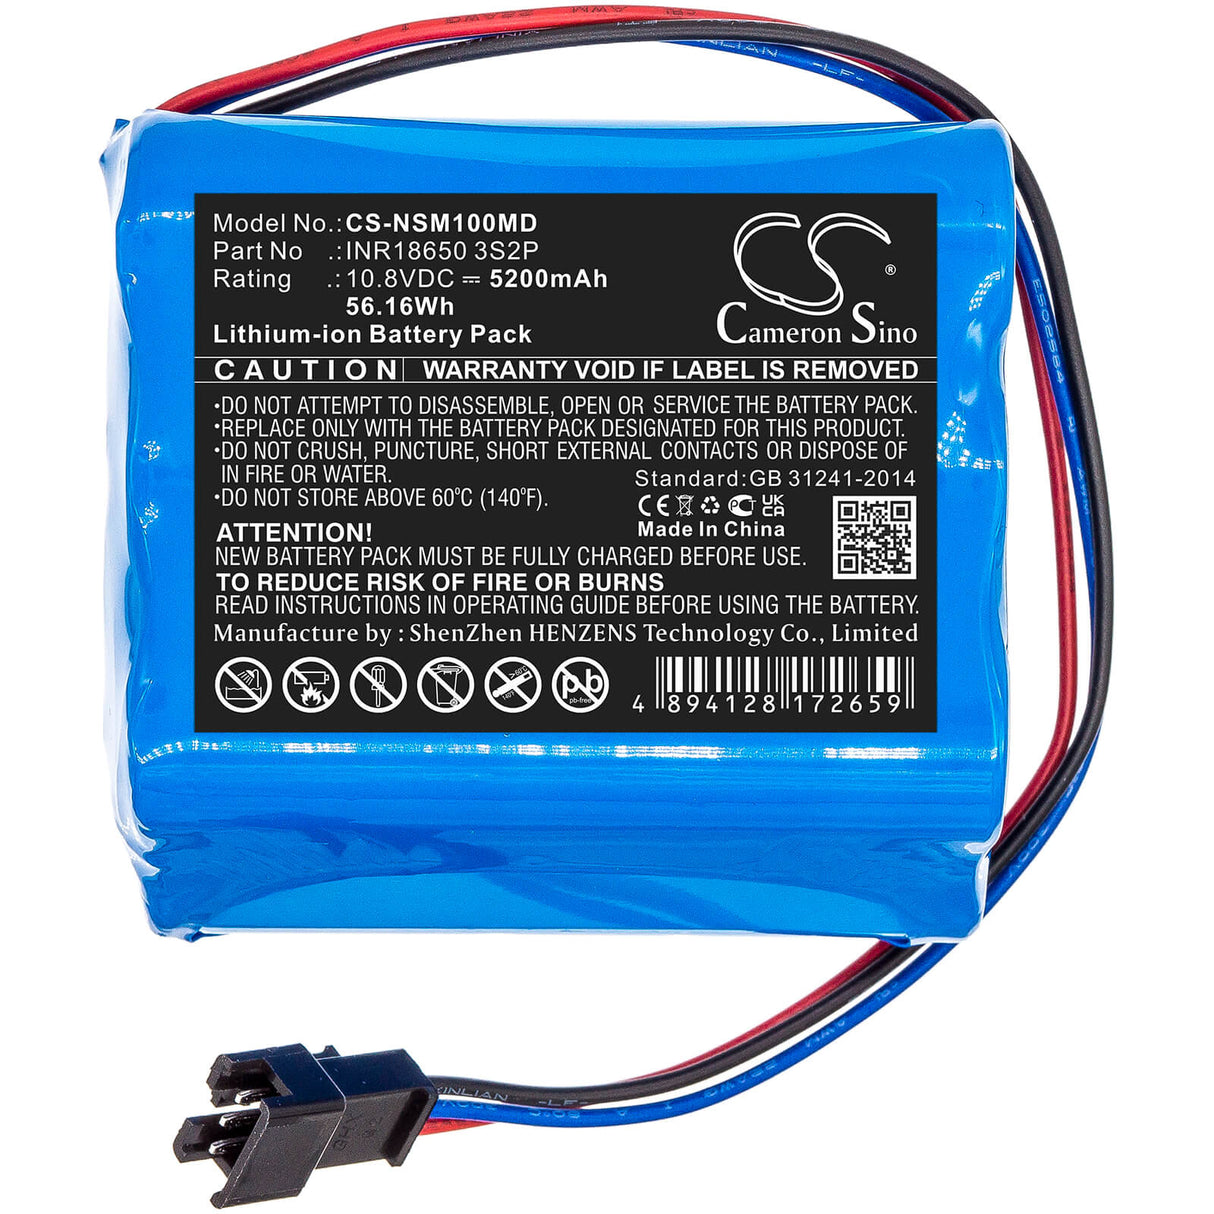 10.8v, 5200mah, Li-ion Battery Fit's Neusoft, Nsc-m10, 56.16wh Batteries for Electronics Cameron Sino Technology Limited   